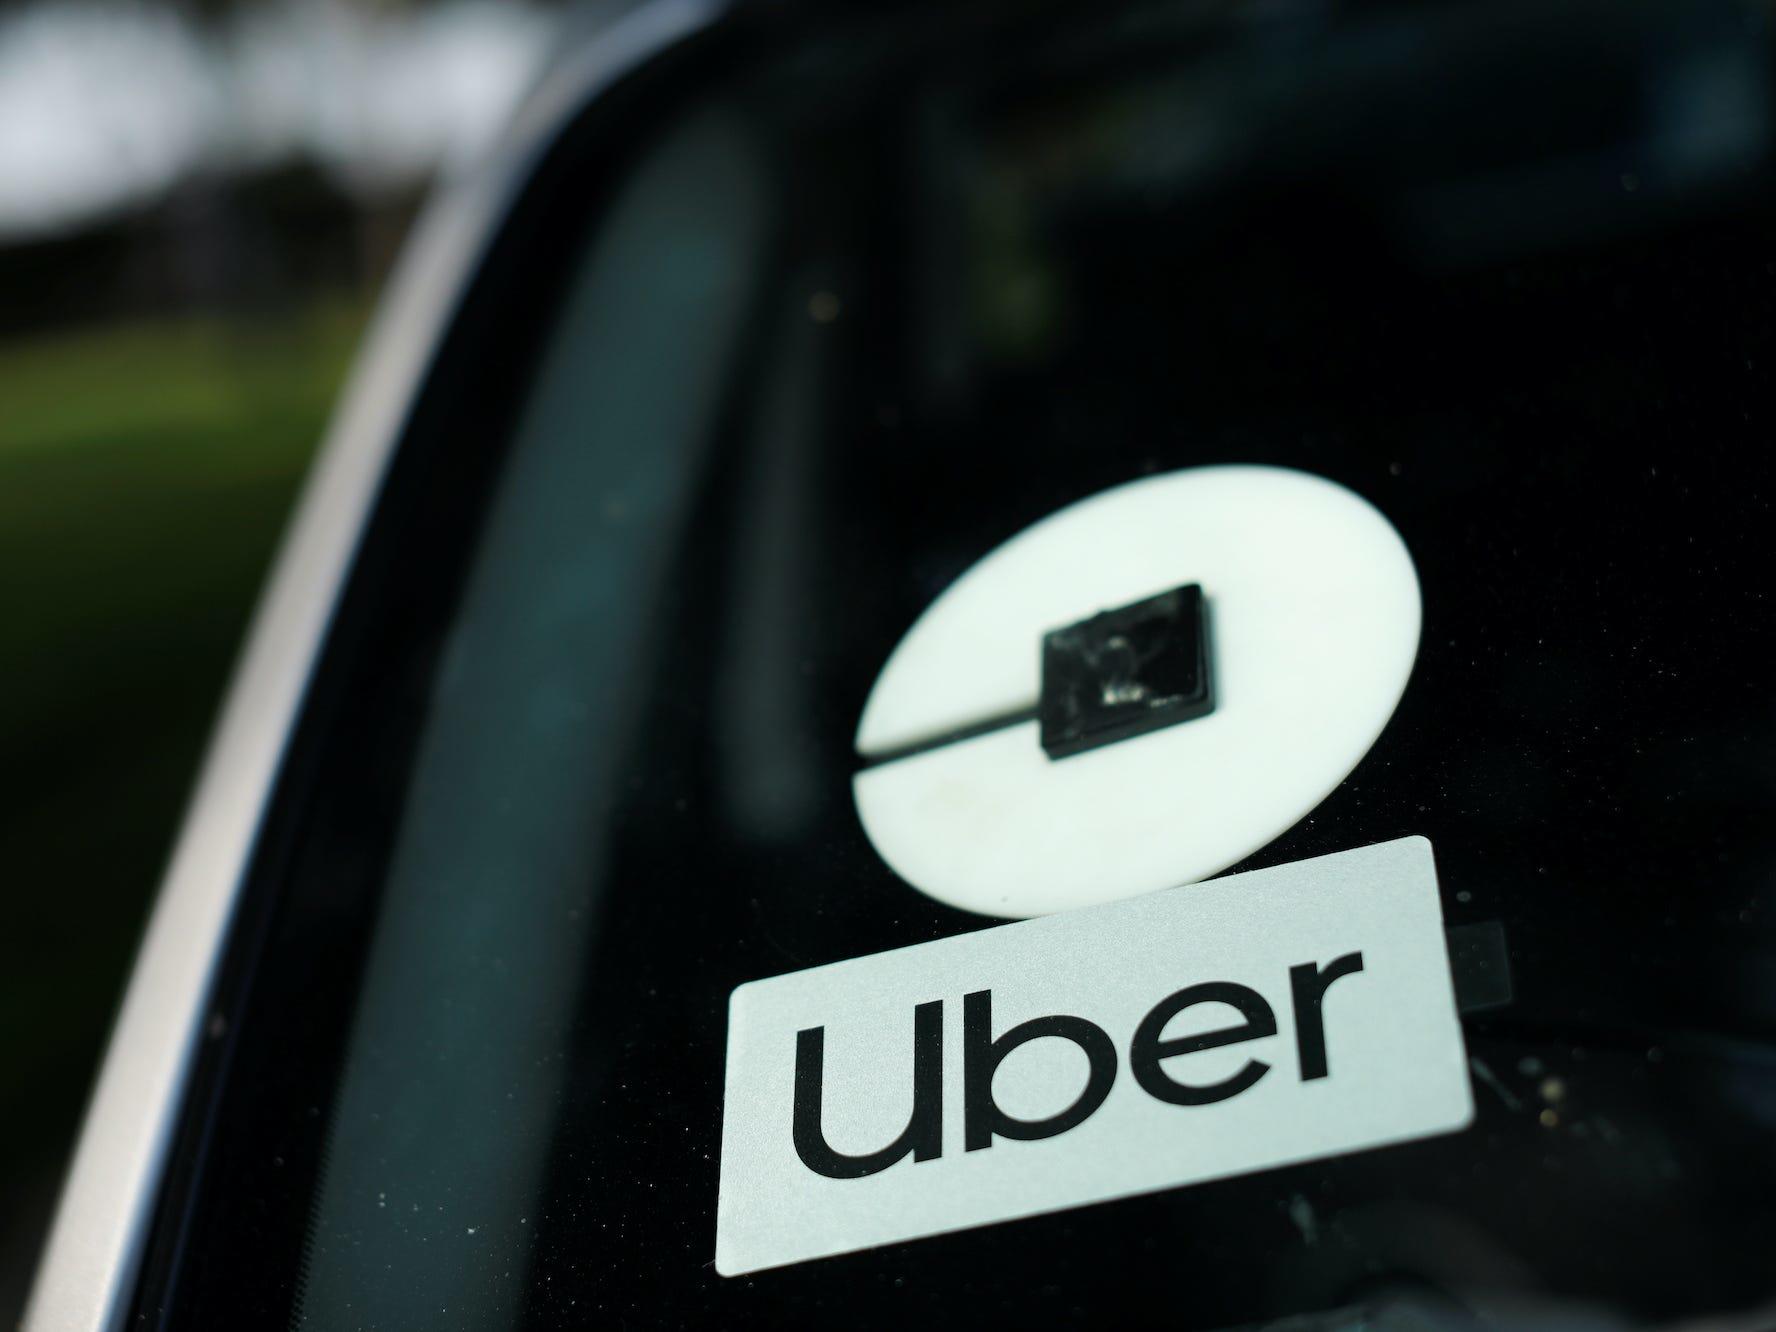 Uber beats Q4 2020 earnings expectations but misses on $3.17 billion in